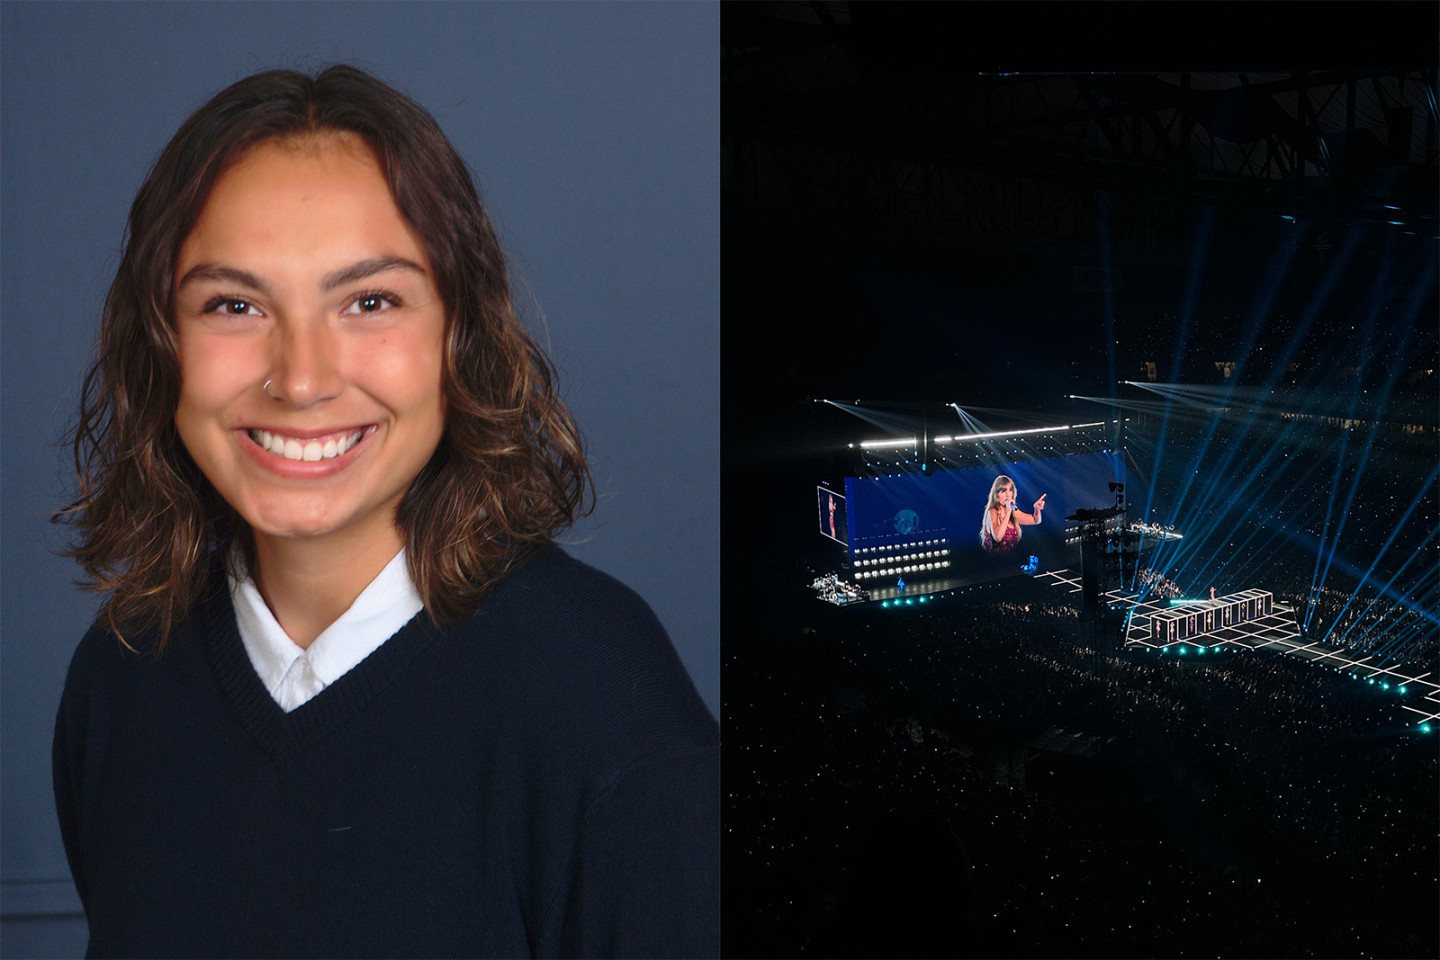 On the left, Jasmine Vicencio wears a navy shirt with a white collar. On the right, Taylor Swift on stage during The Eras Tour at Ford Field.